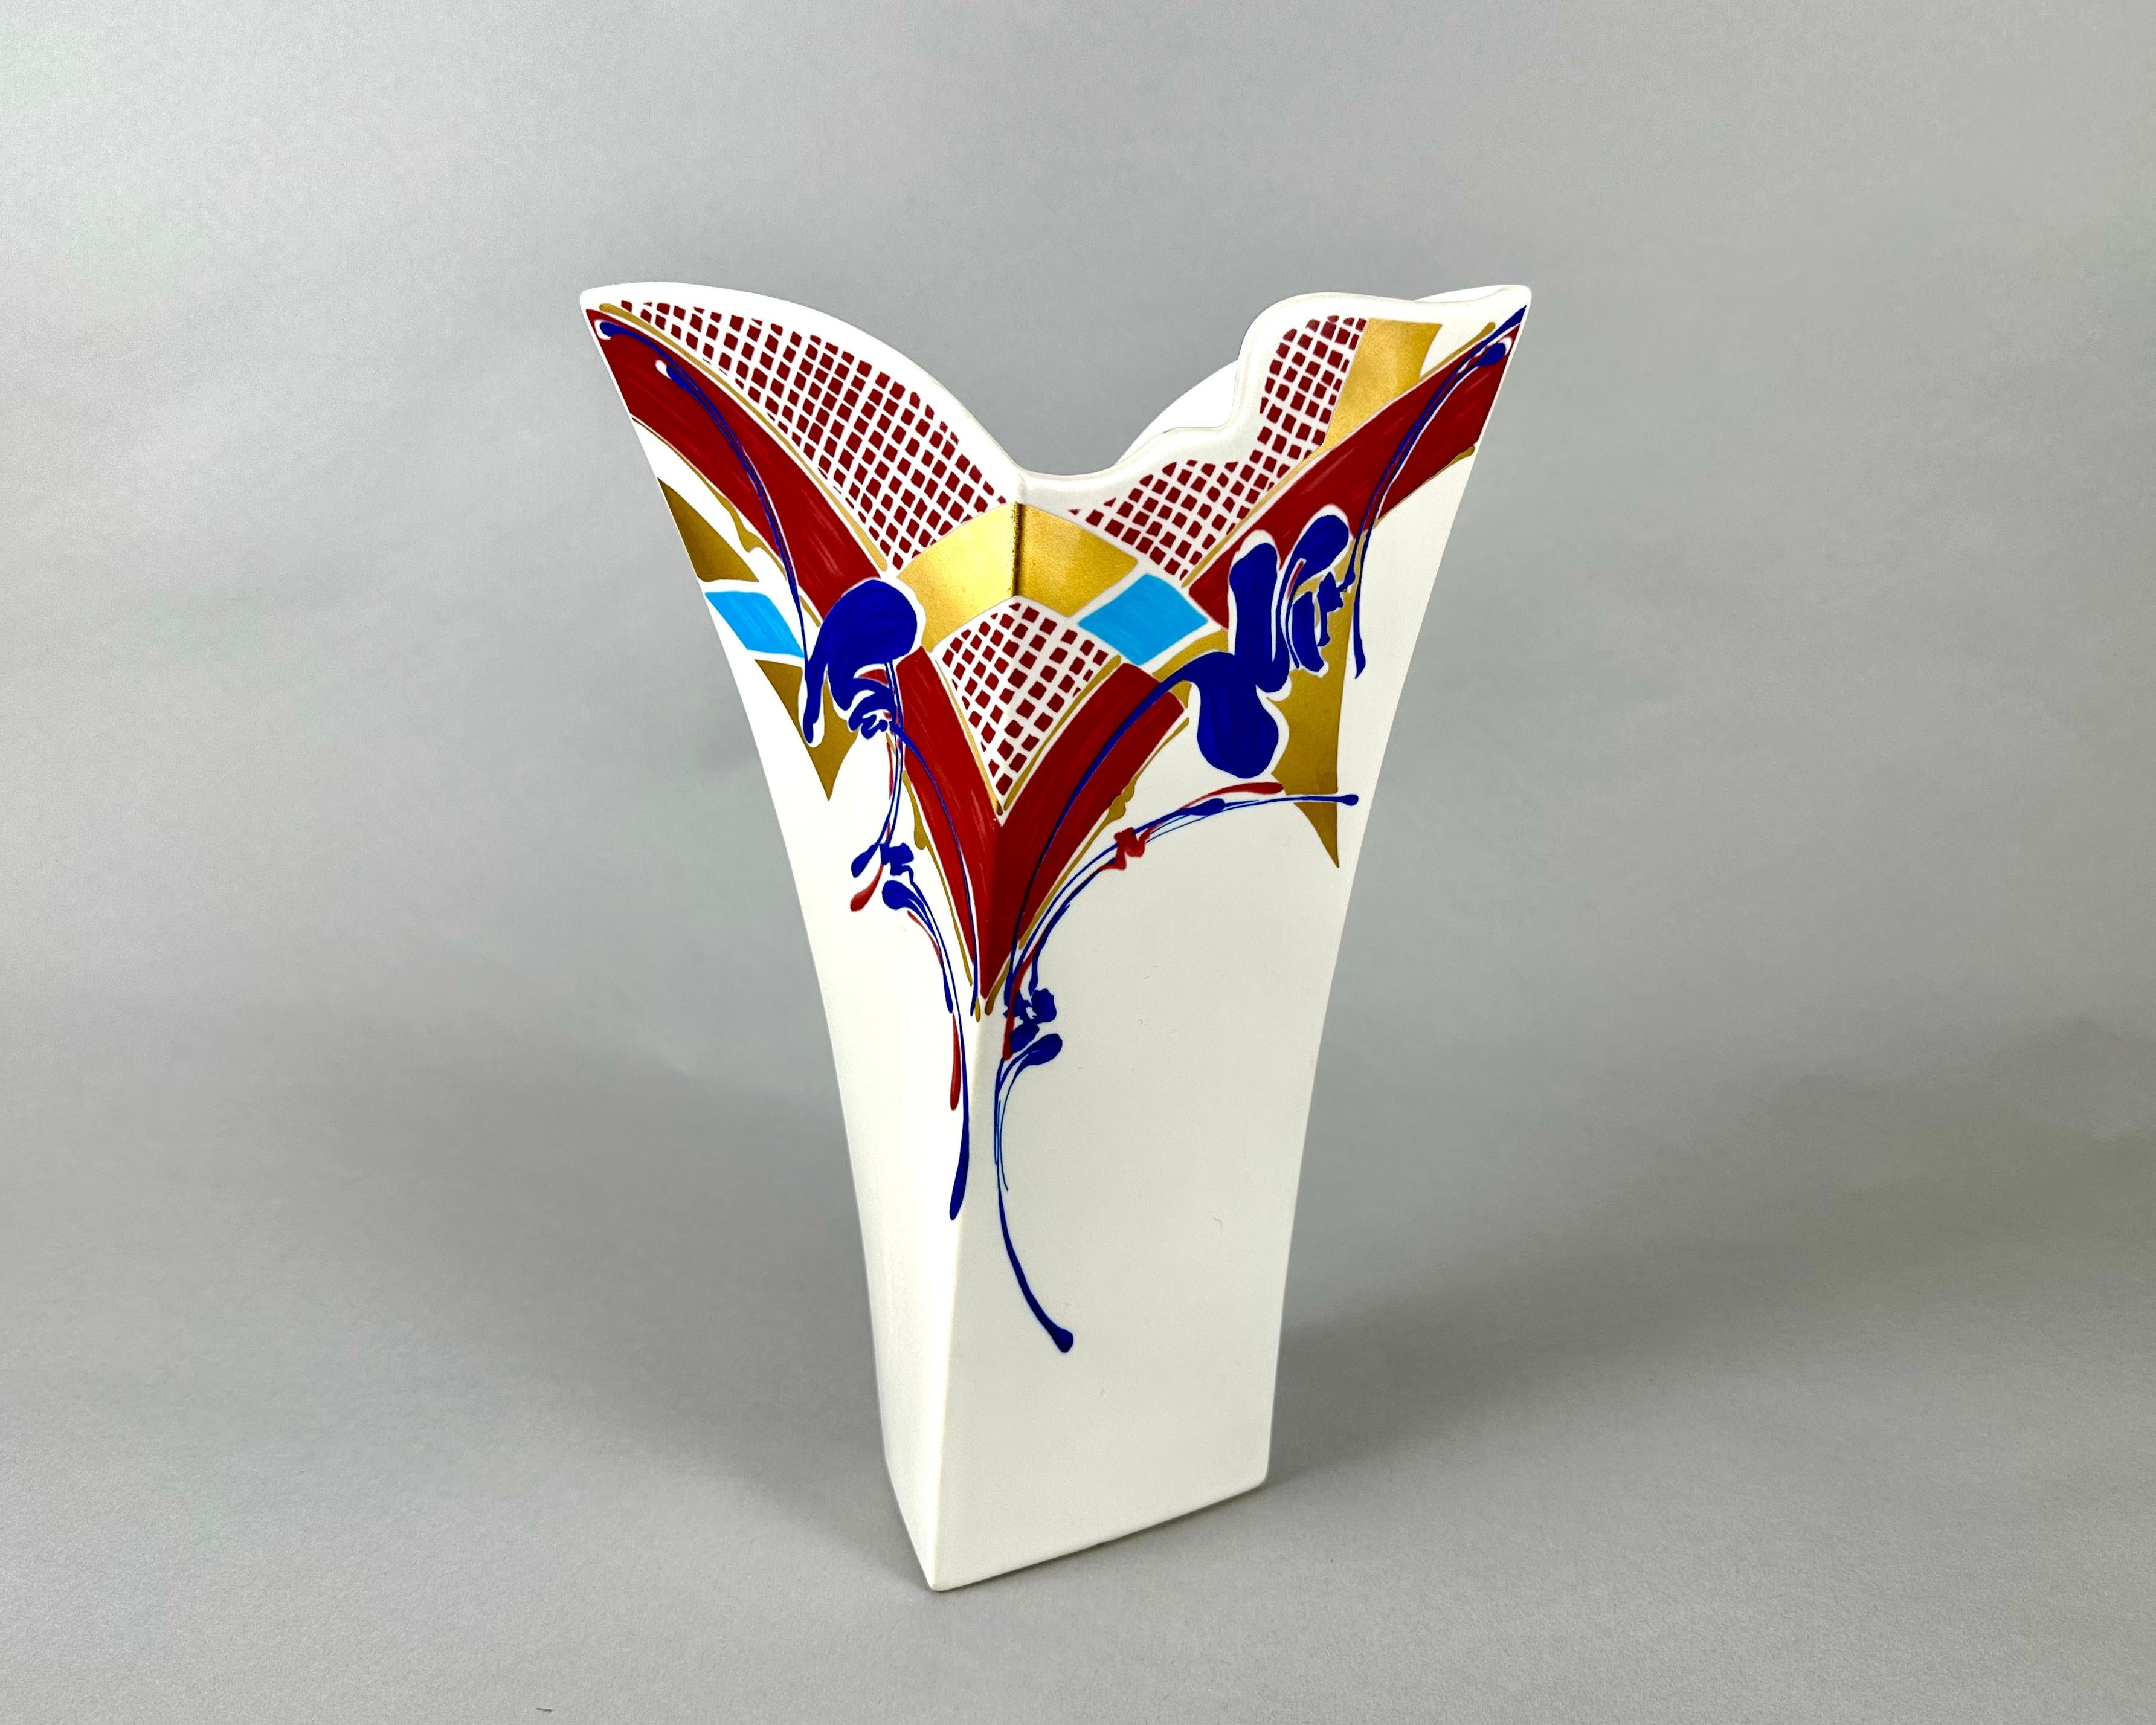 Vintage Geometric Vase Rosenthal Studio Line Porcelain, Germany  Art Deco Vase With Gold, Blue and Rouge Paint.

The hand paint is in an art deco style and is abstract in its' patterns. 


The vase will delight the owners with its functionality and